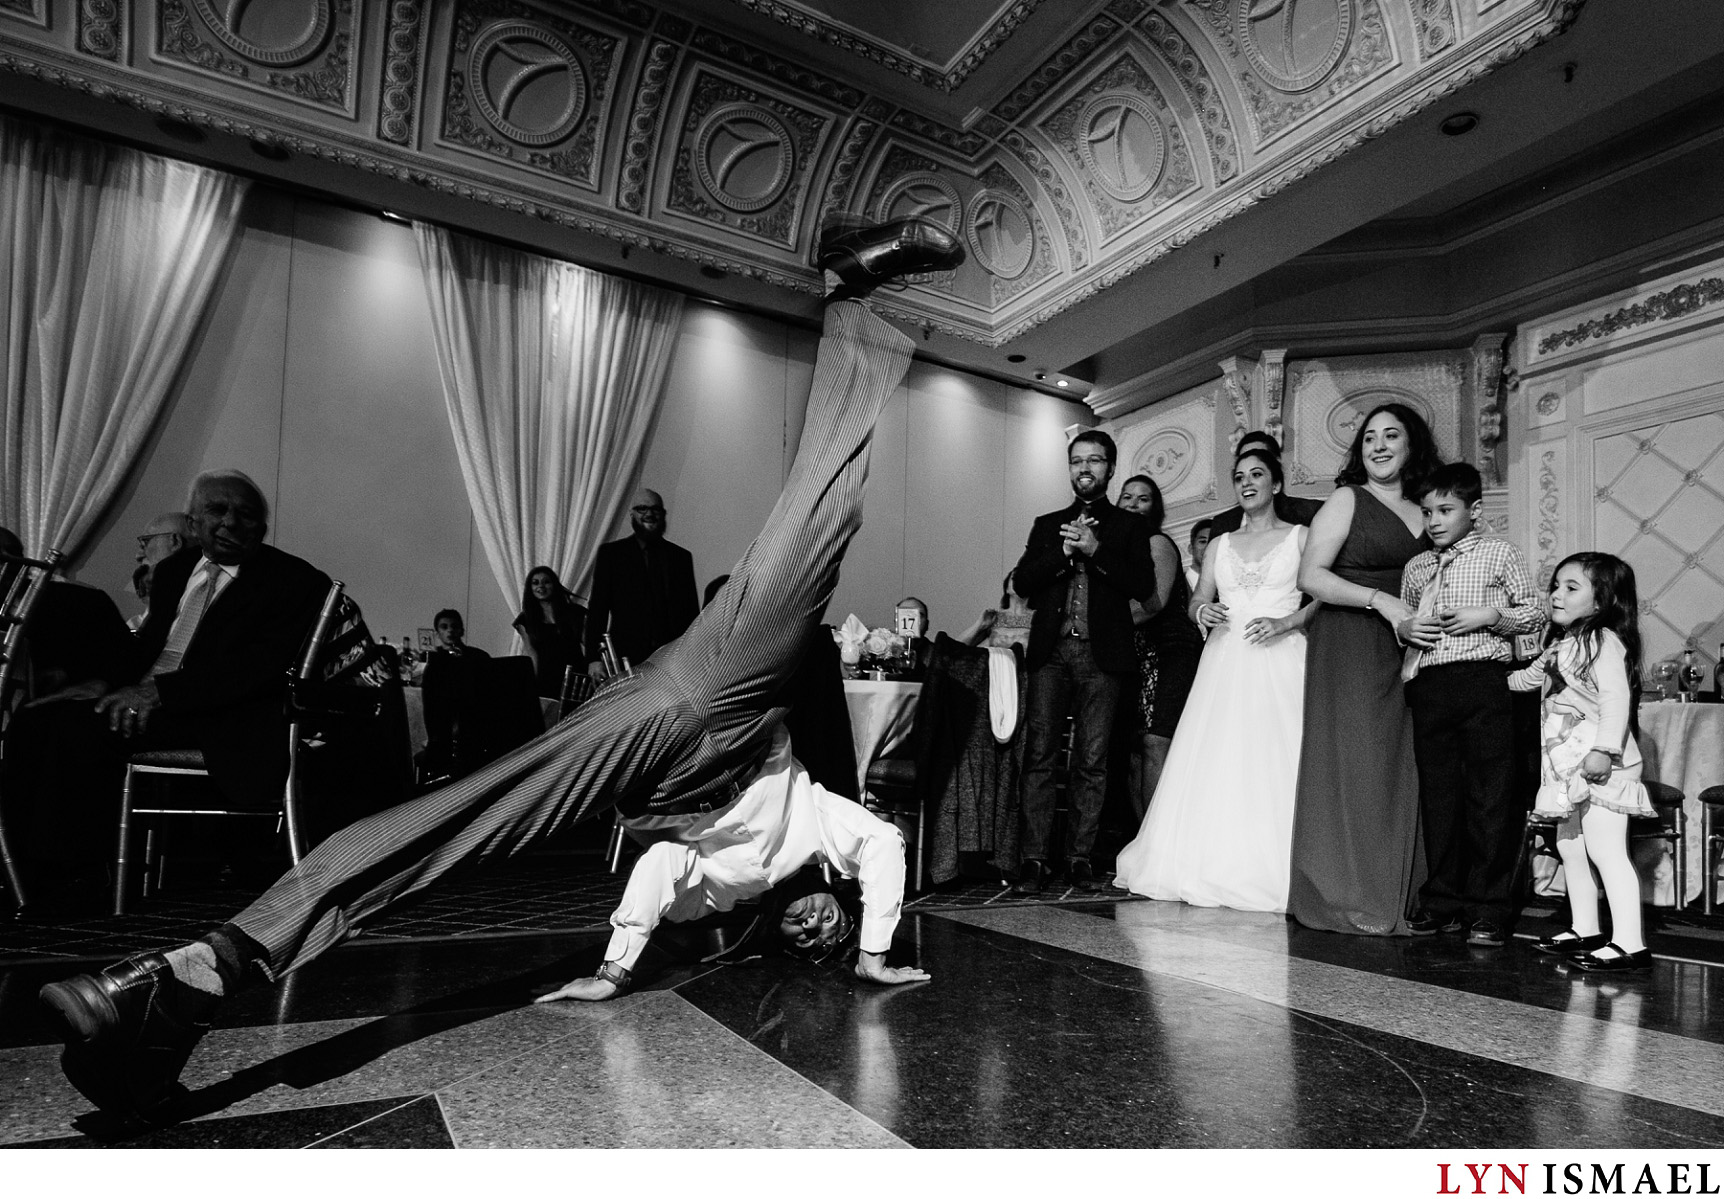 A flexible wedding guest busts a move at a wedding reception in Vaughan, Ontario.